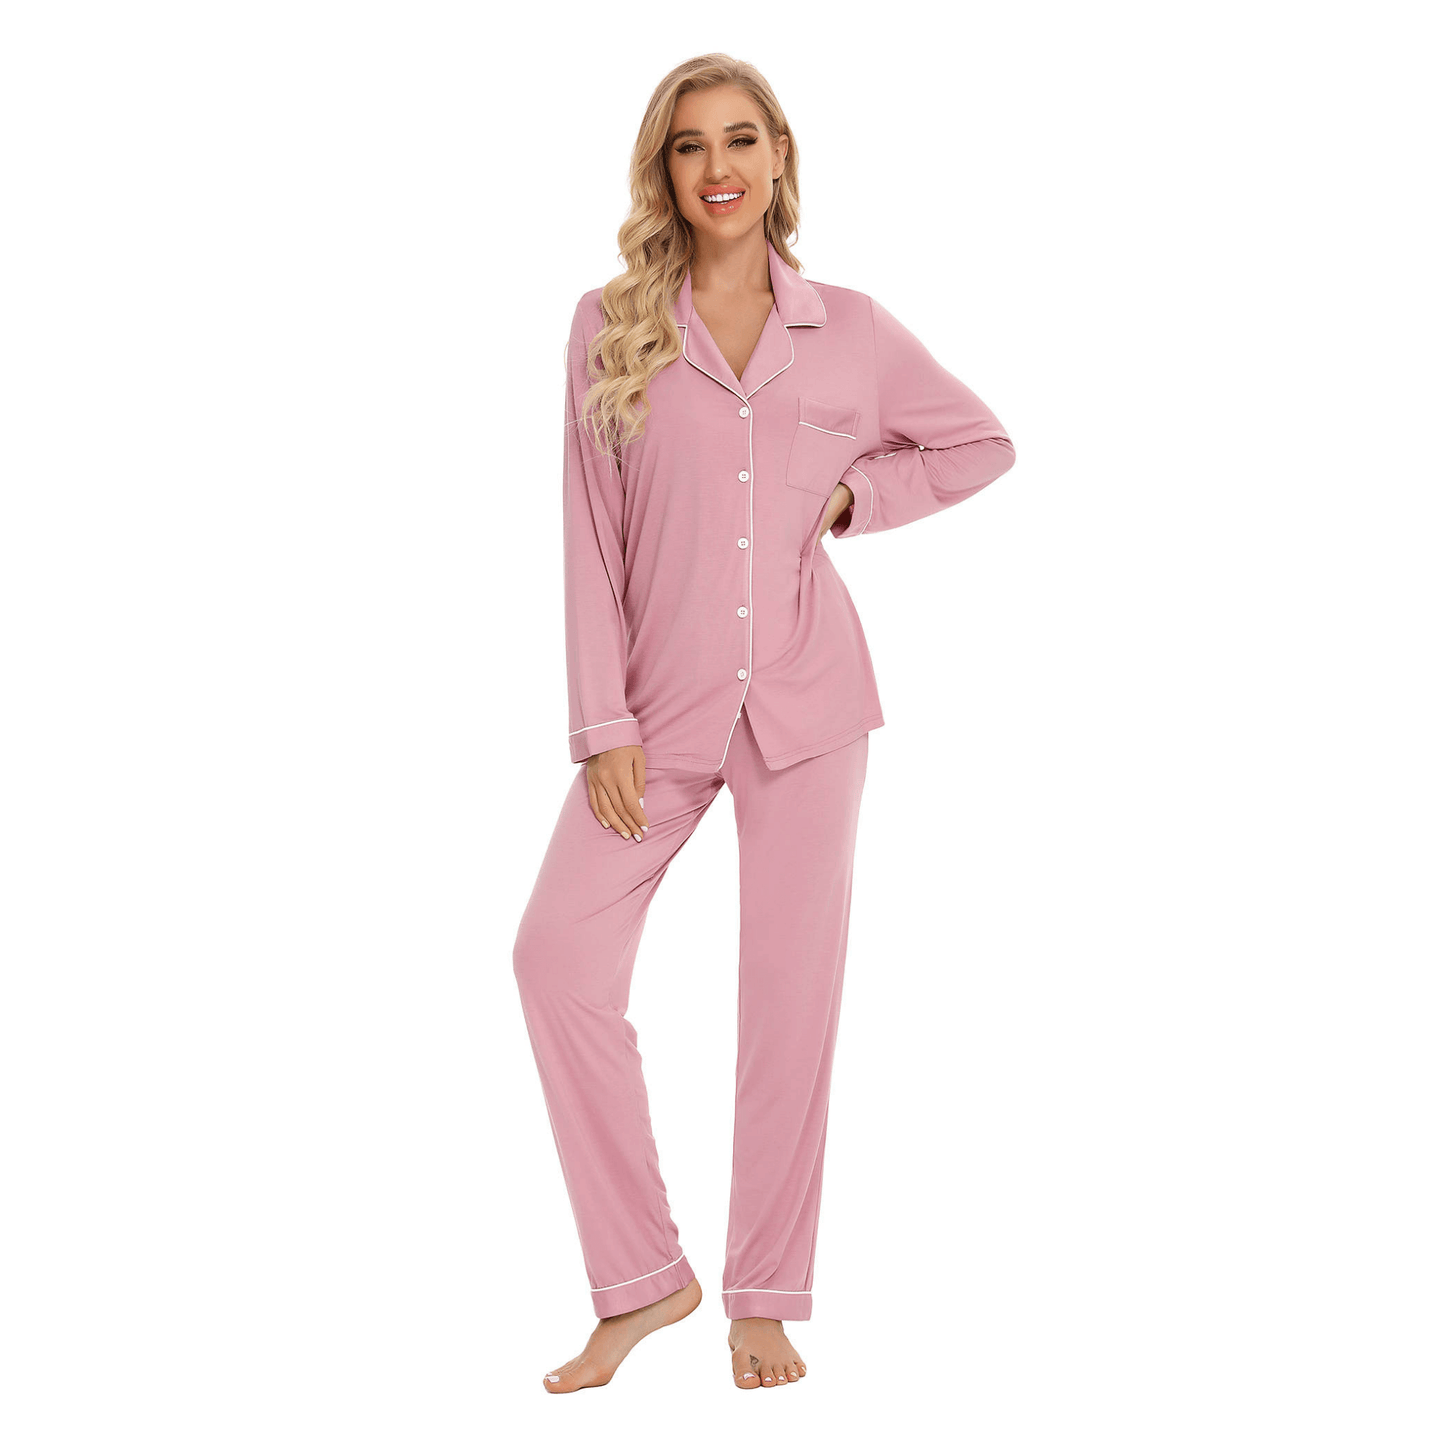 Ladies bamboo dusky pink sleepwear sets with white piping and drawstring